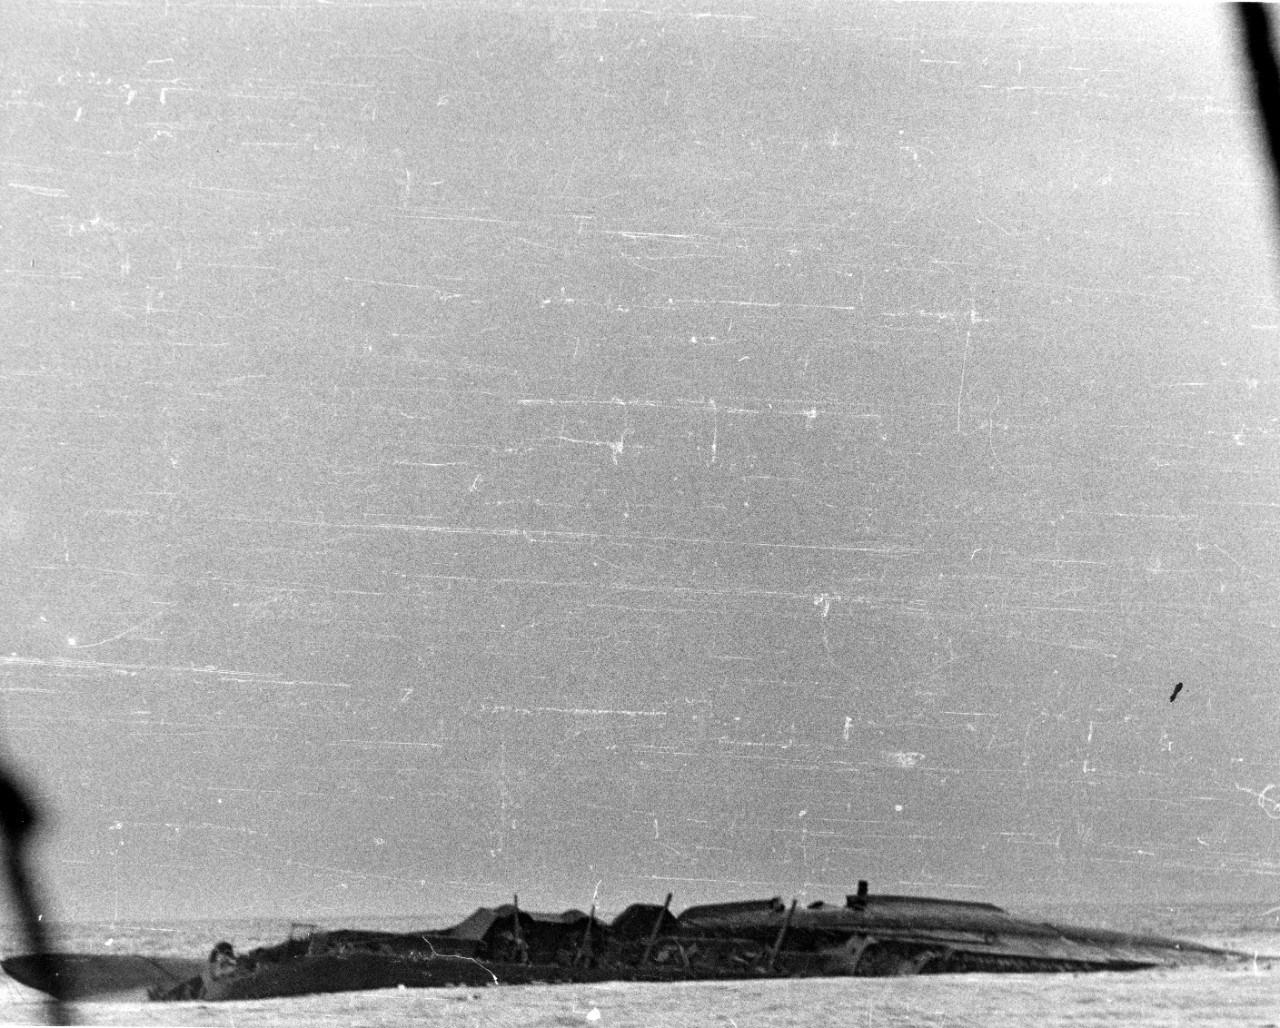 Photo #: NH 106006  Battle of Midway, June 1942